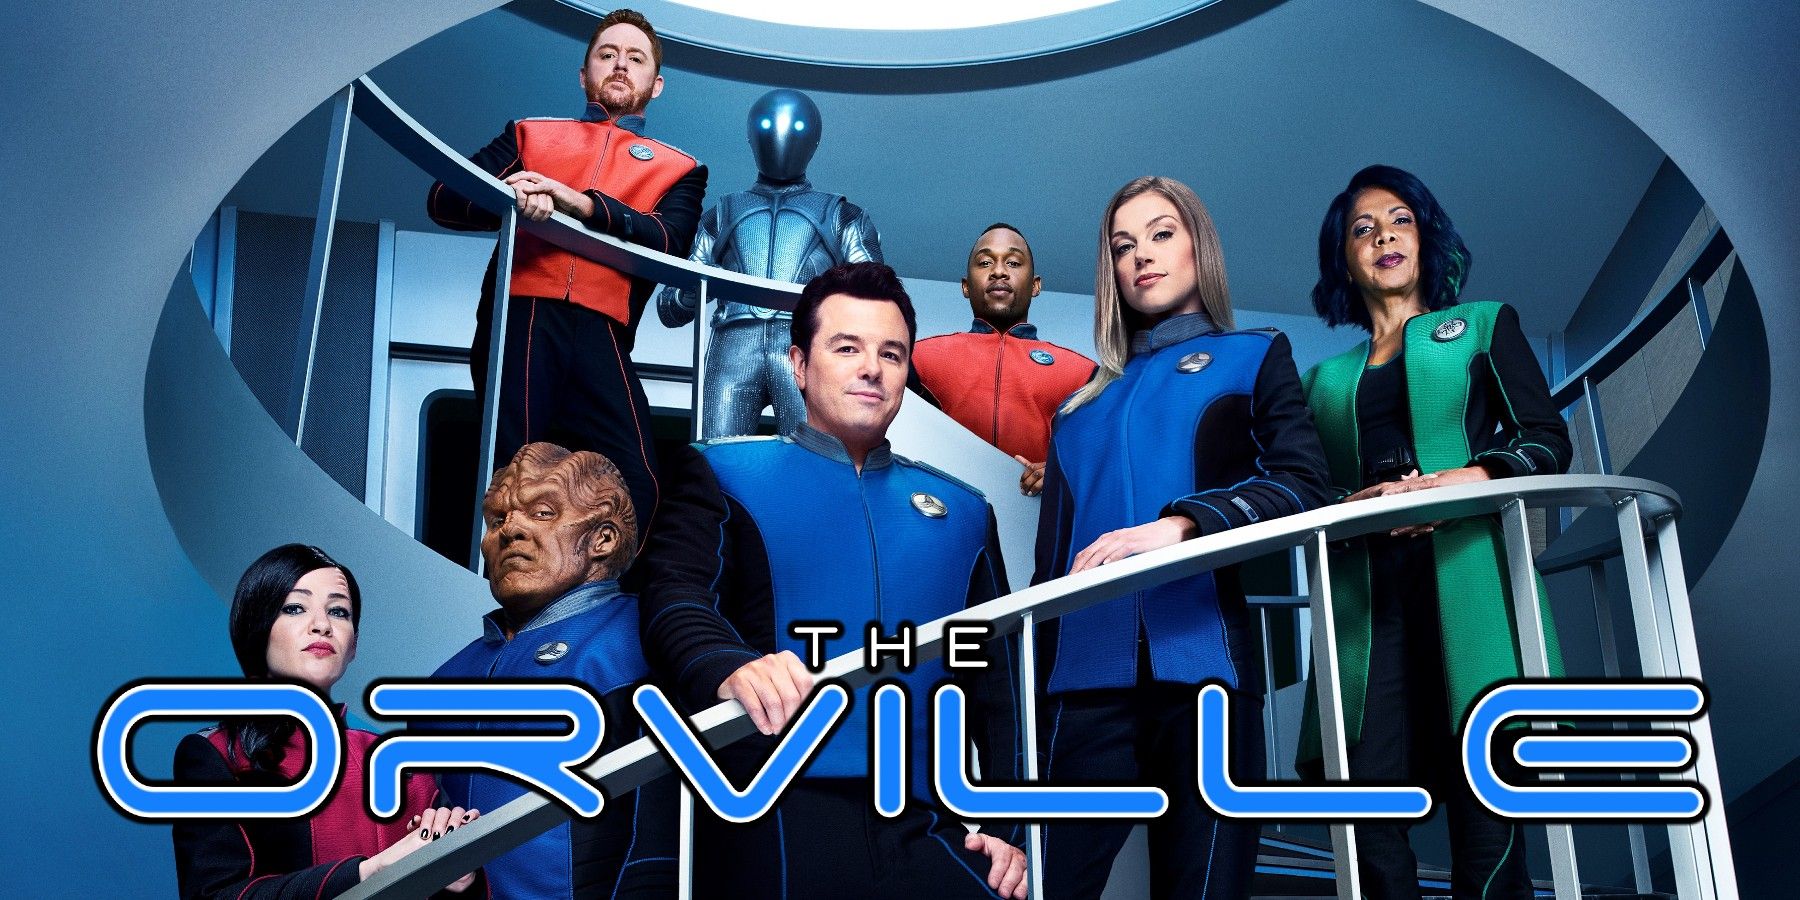 The cast of The Orville